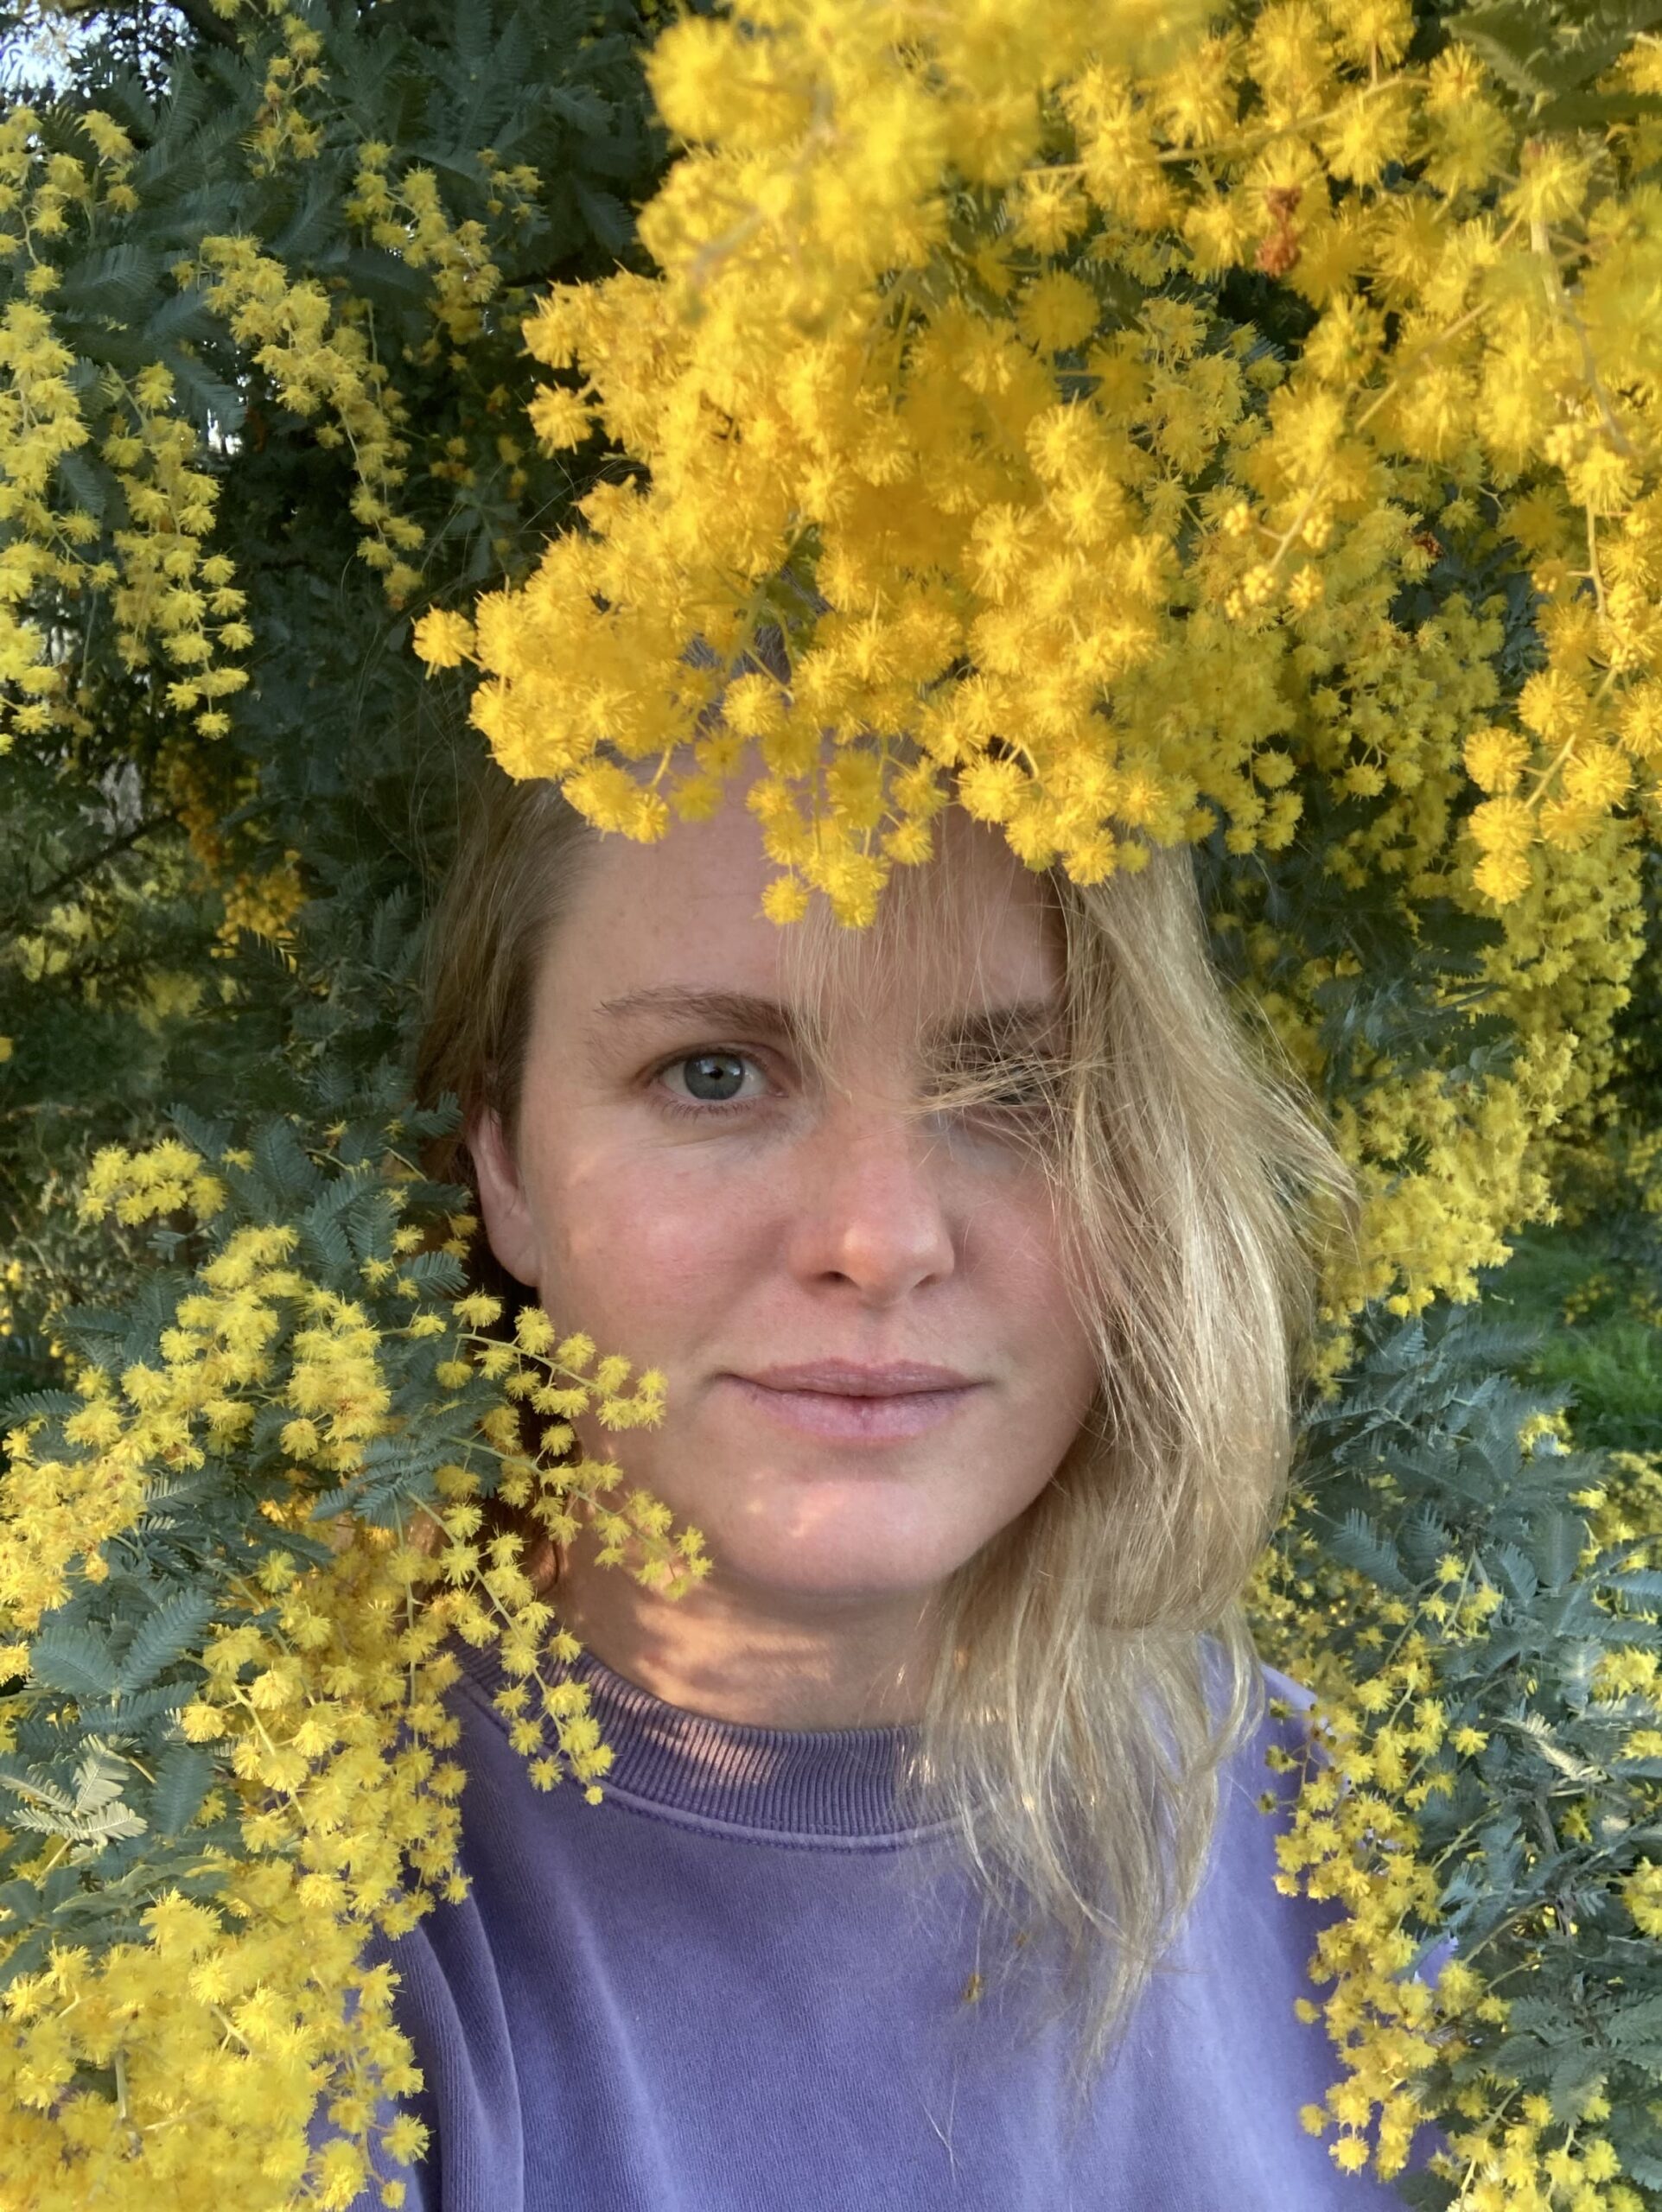 A woman with blonde hair cascading down the left side of her face, with a slight grin on hear face wearing a purple jumper, surrounded by a native yellow wattle bush